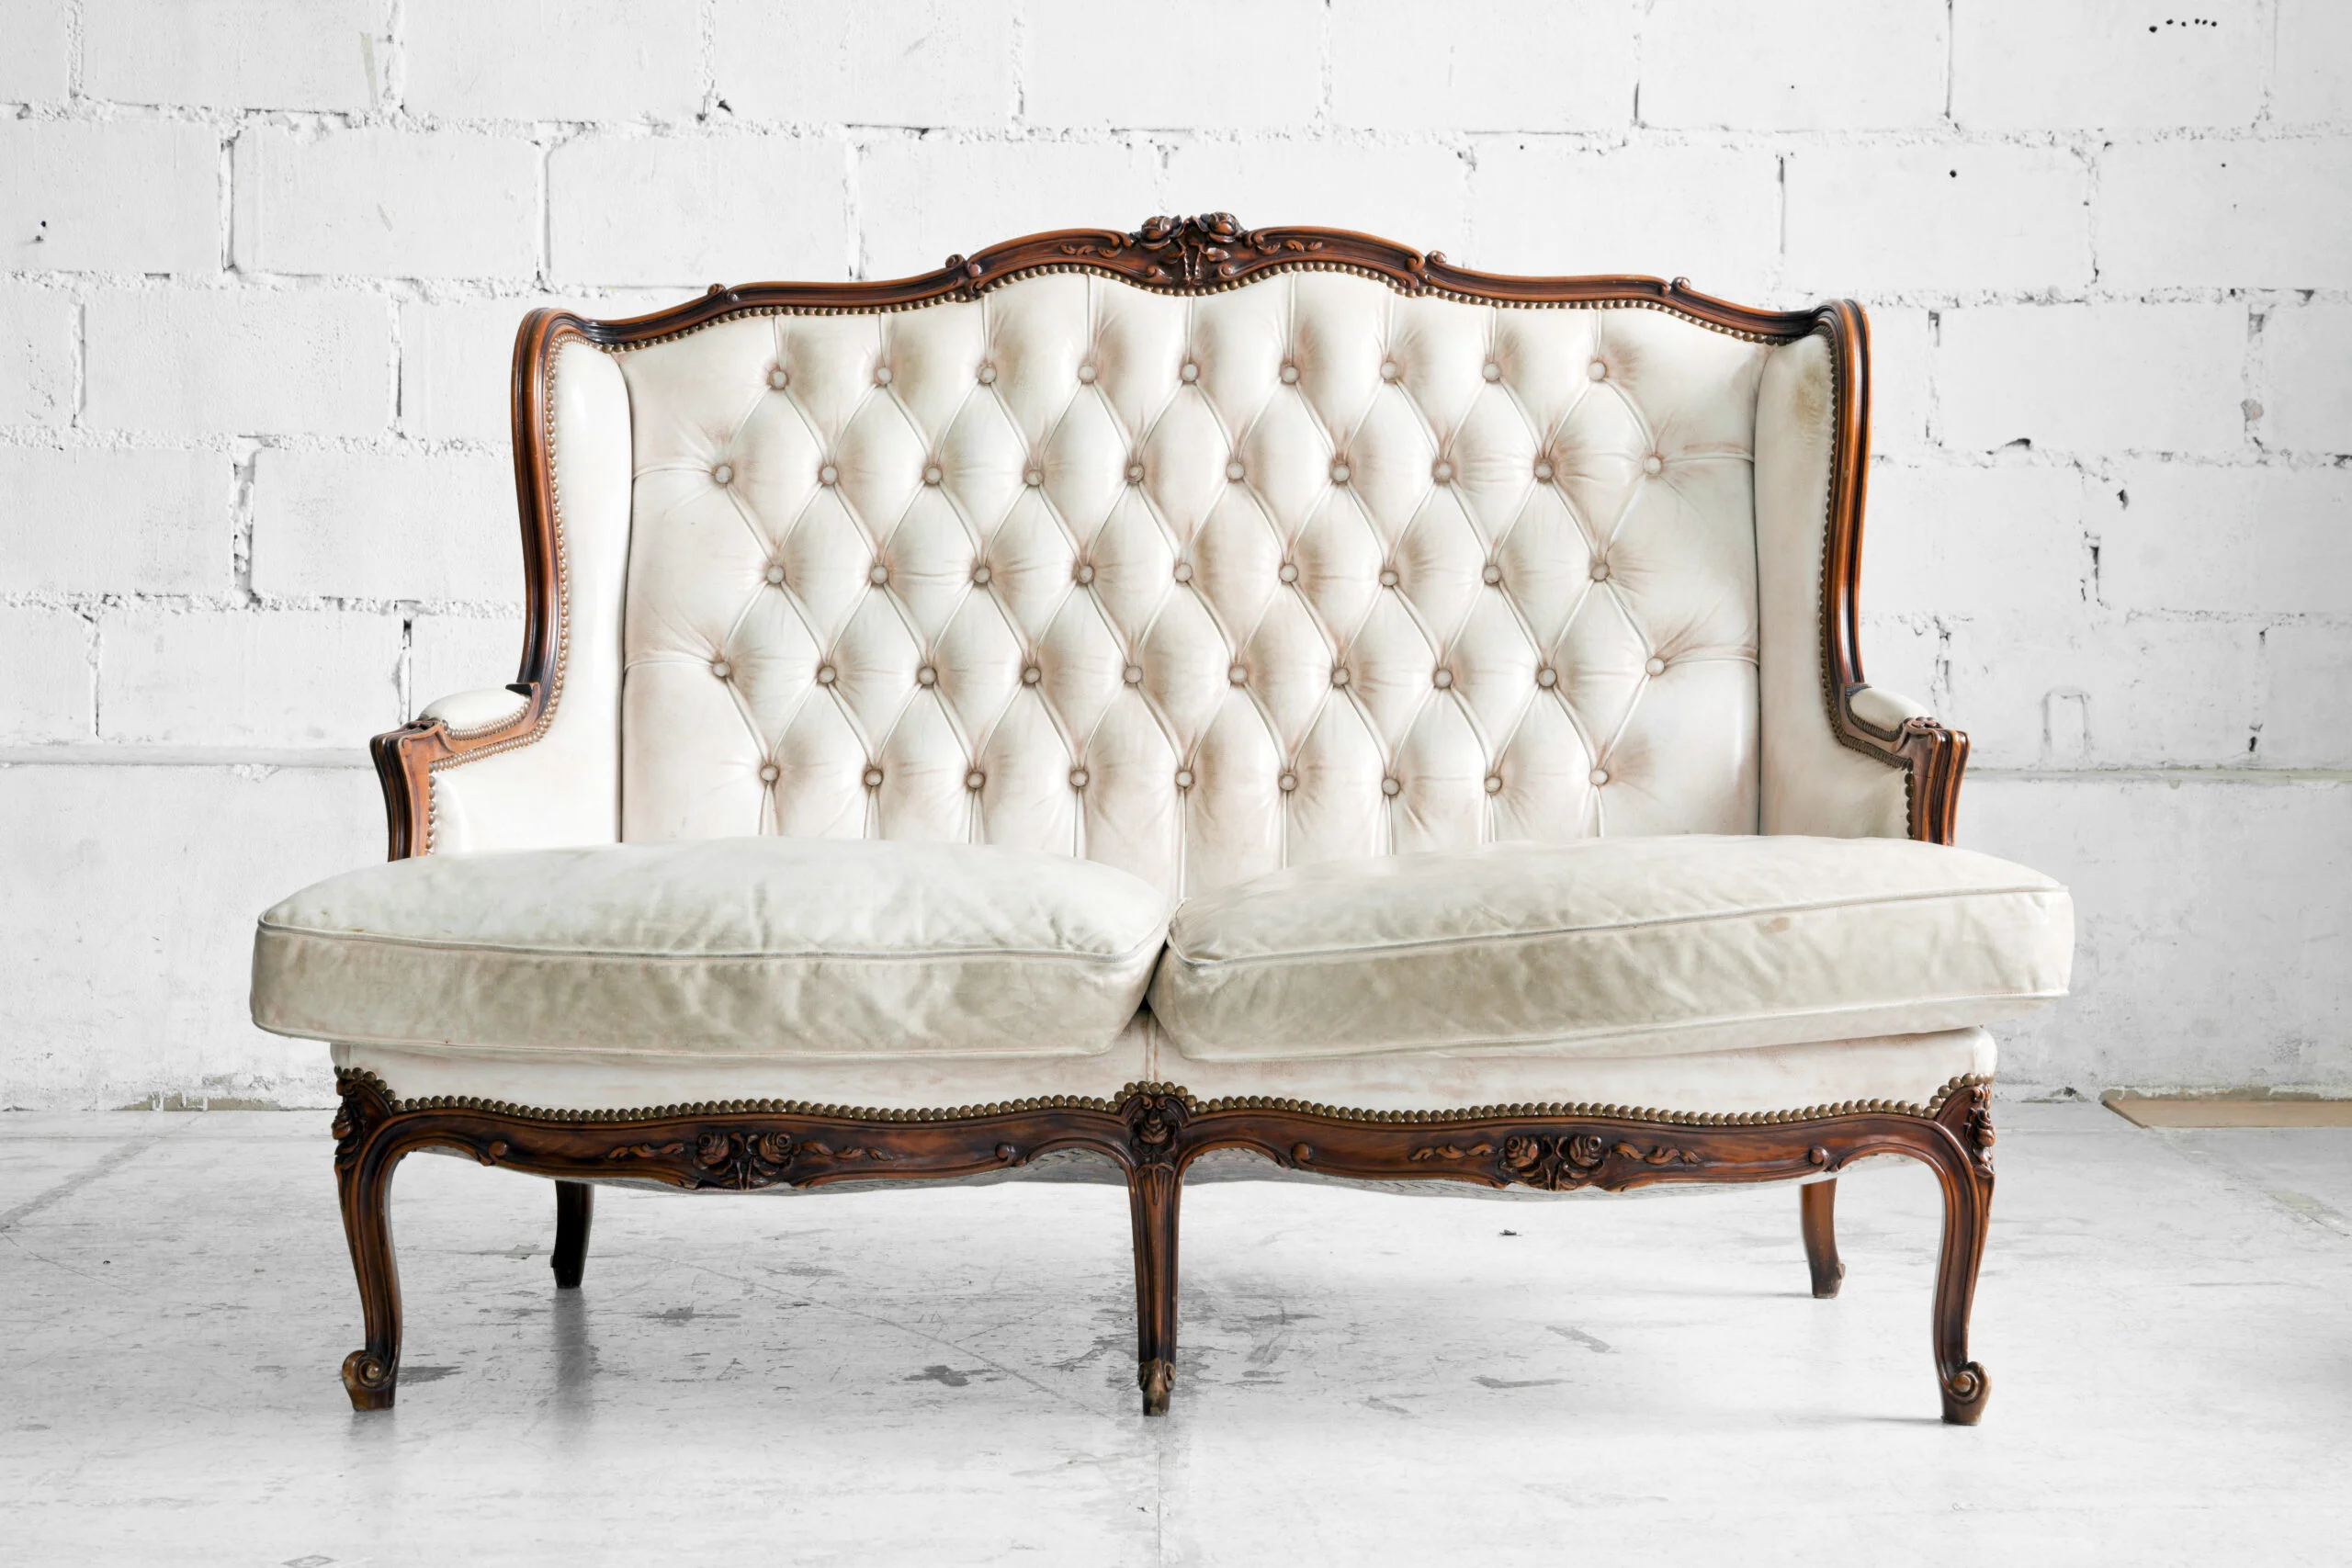 The Best Vintage Furniture Austin Has to Offer